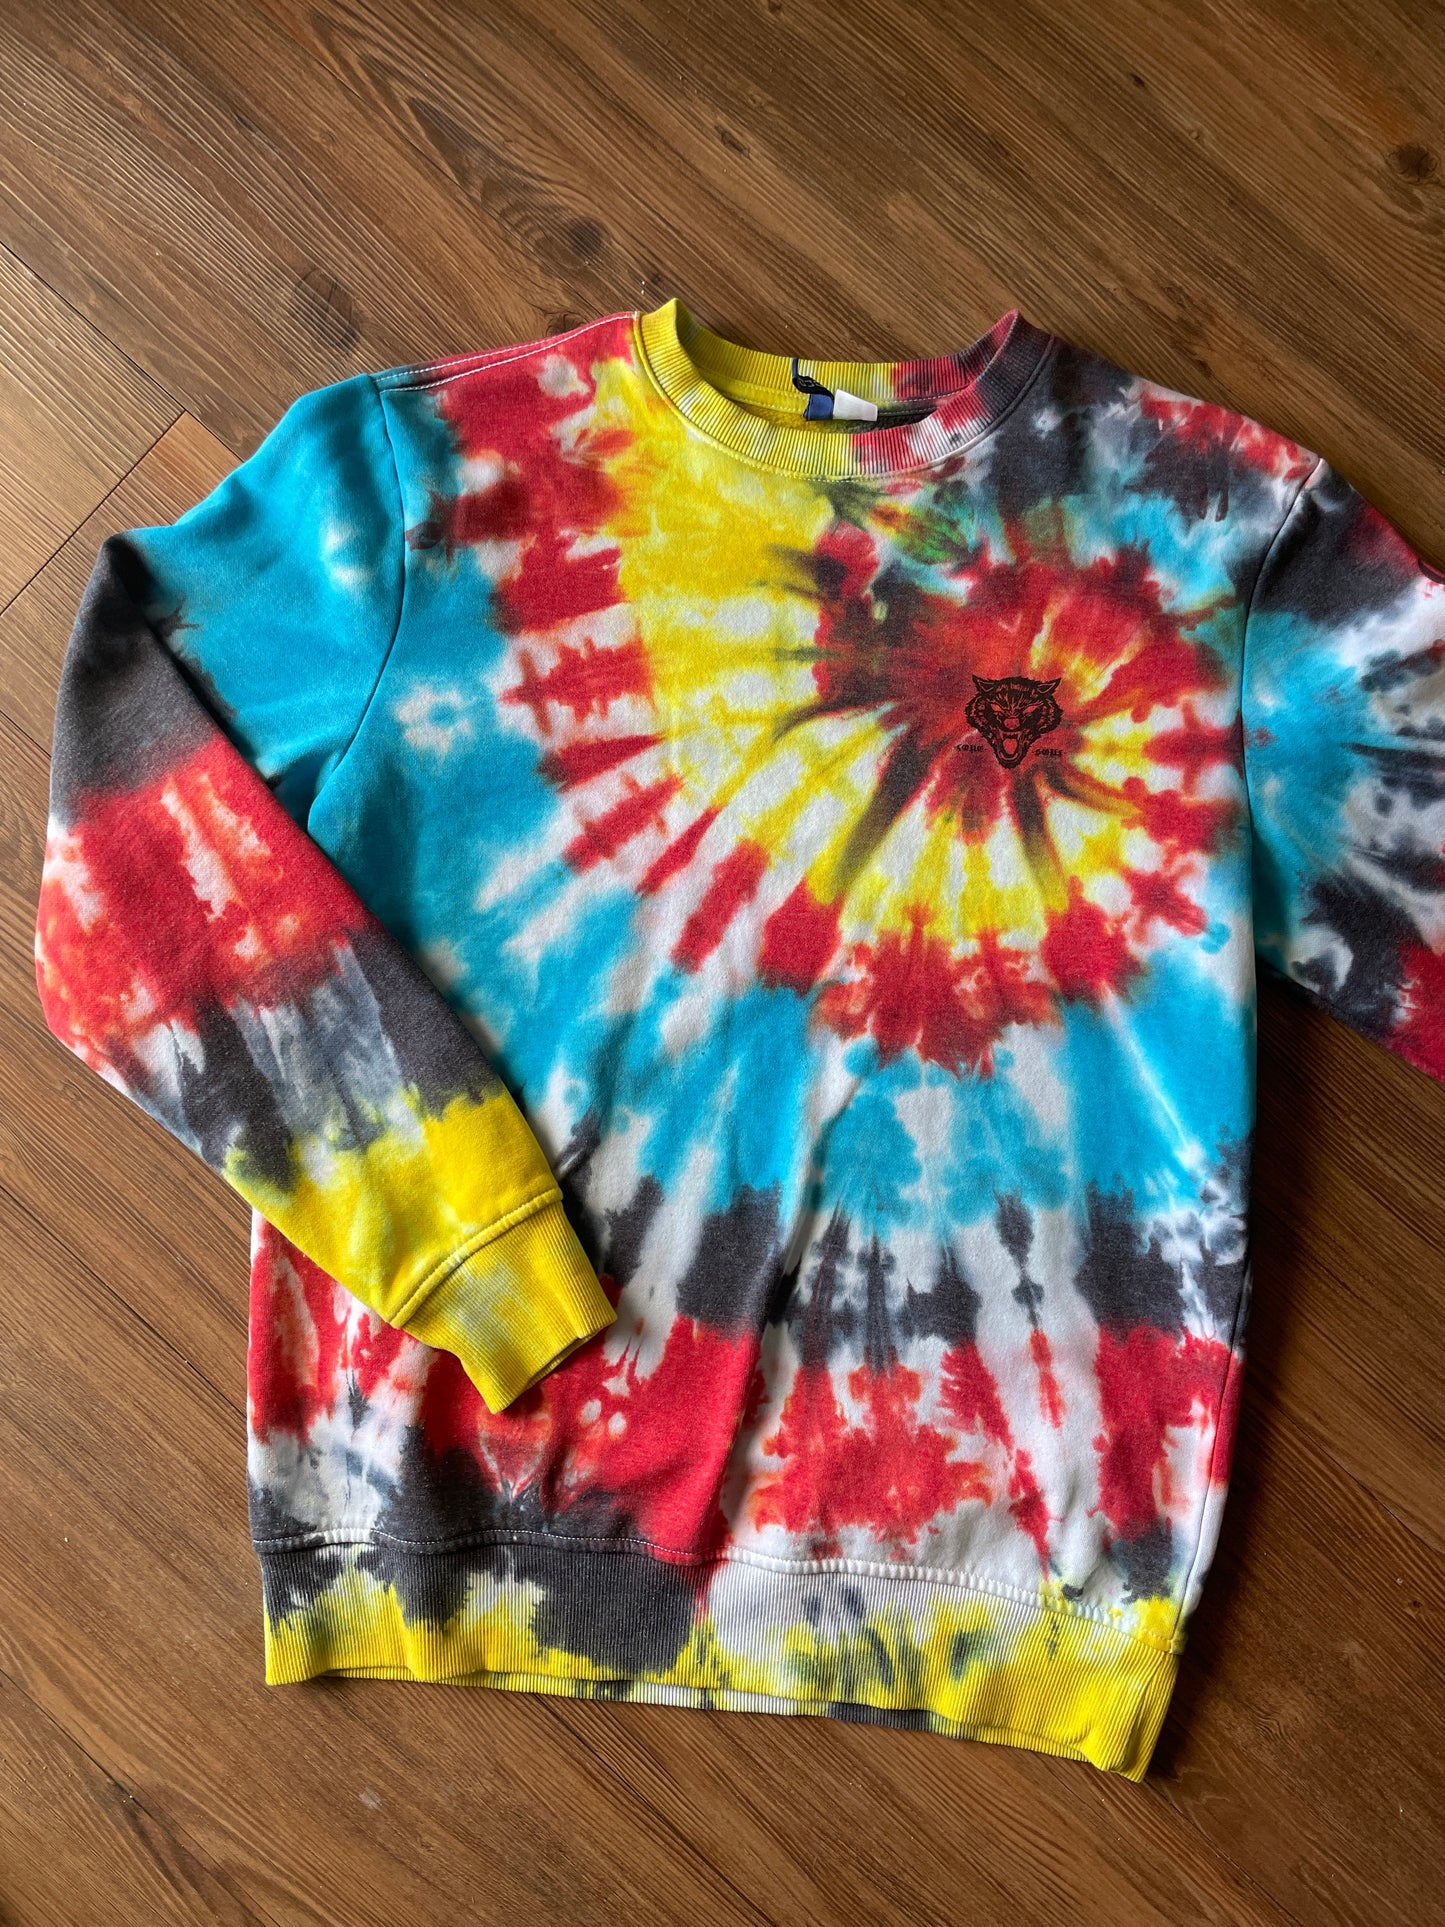 SMALL Men’s Last Night Tiger Tie Dye Sweatshirt | Red, Yellow, Blue, and Black Spiral Long Sleeve